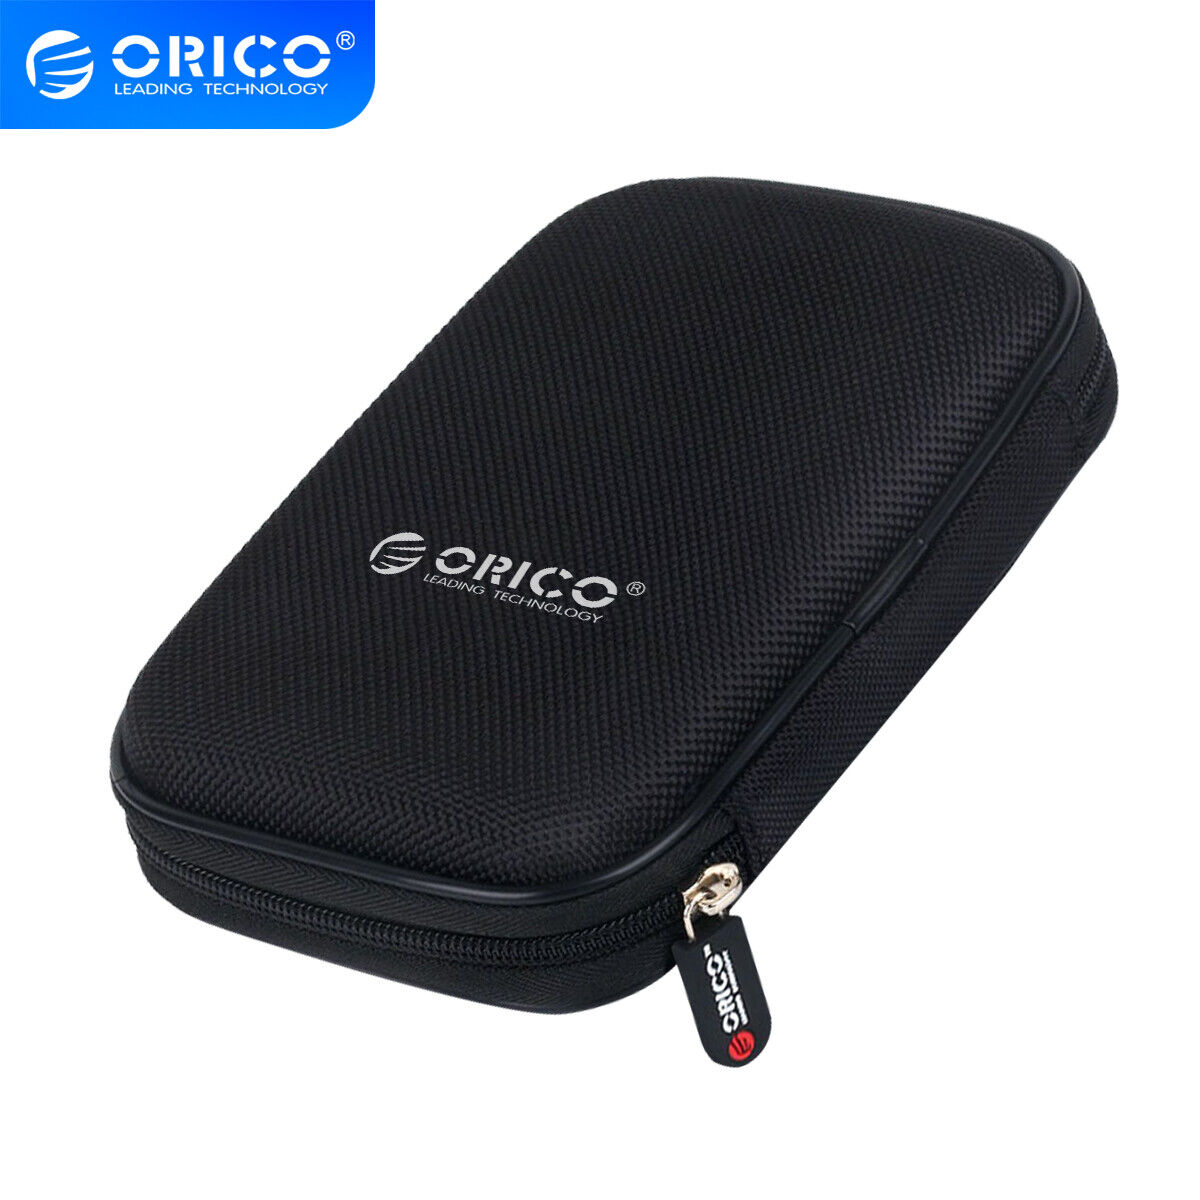 ORICO 2.5inch Hard Drive Enclosure USB 3.1 Type C External Enclosure for 9.5/7mm